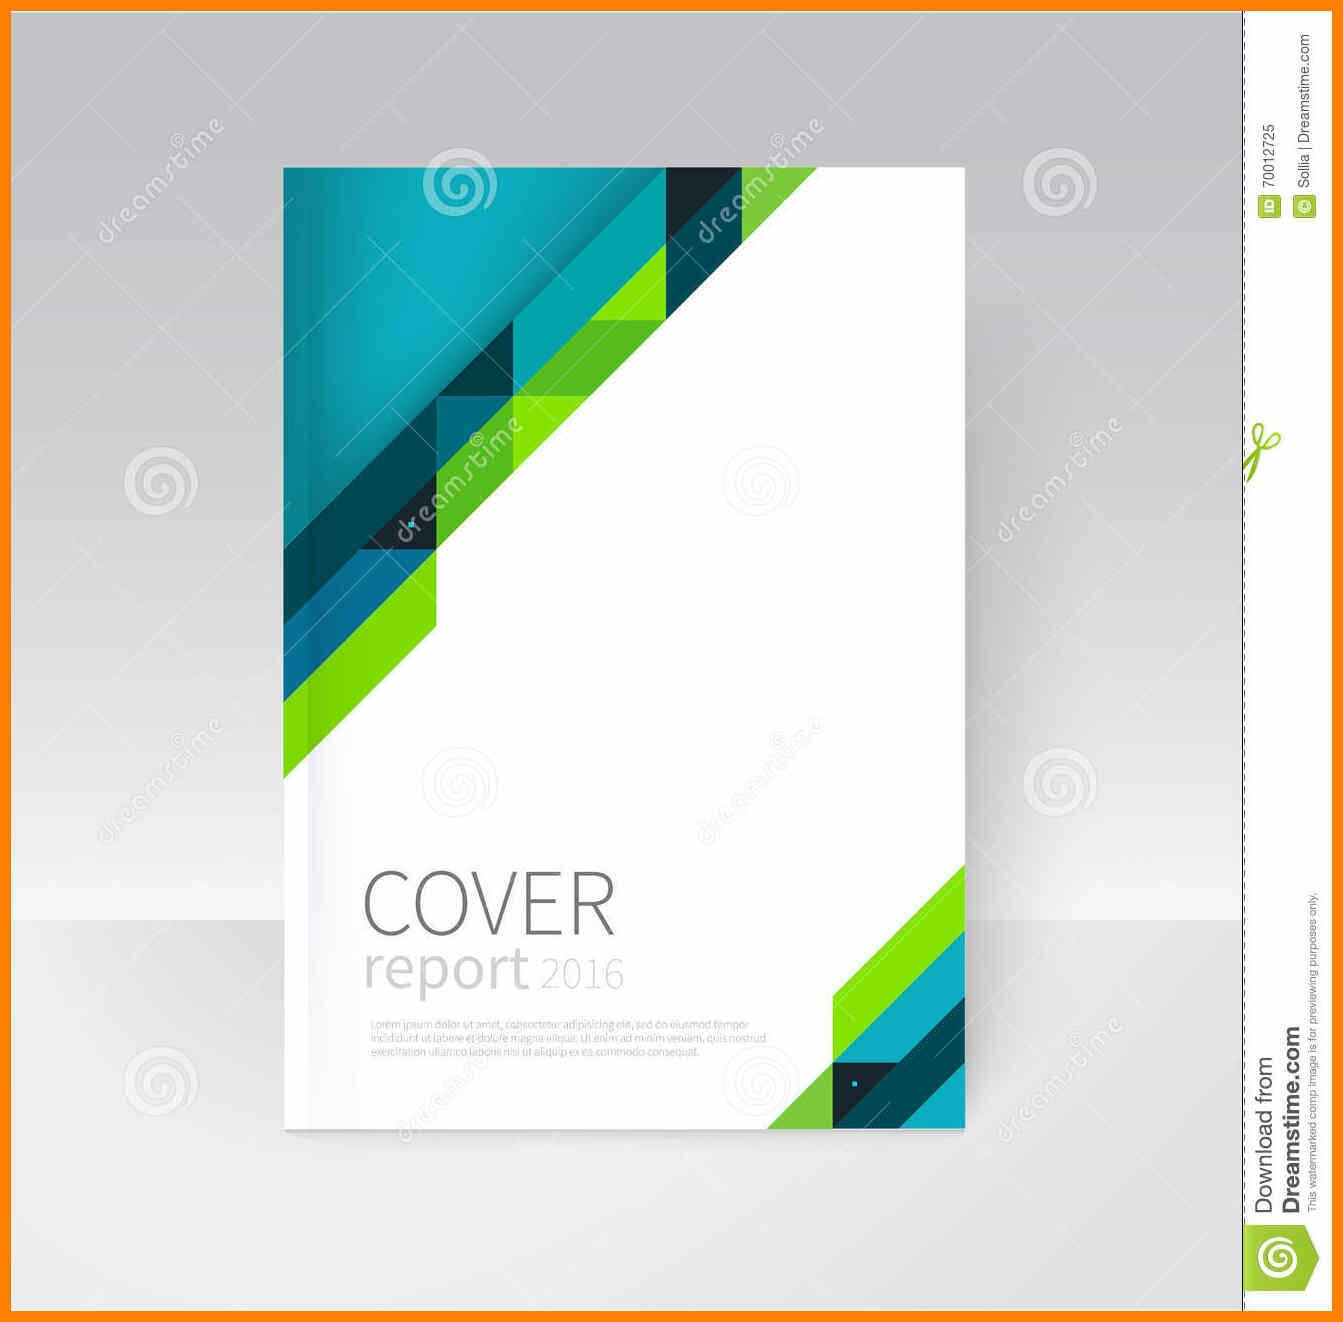 Microsoft Word Report Templates Free Download – Humman With Regard To Cover Page Of Report Template In Word